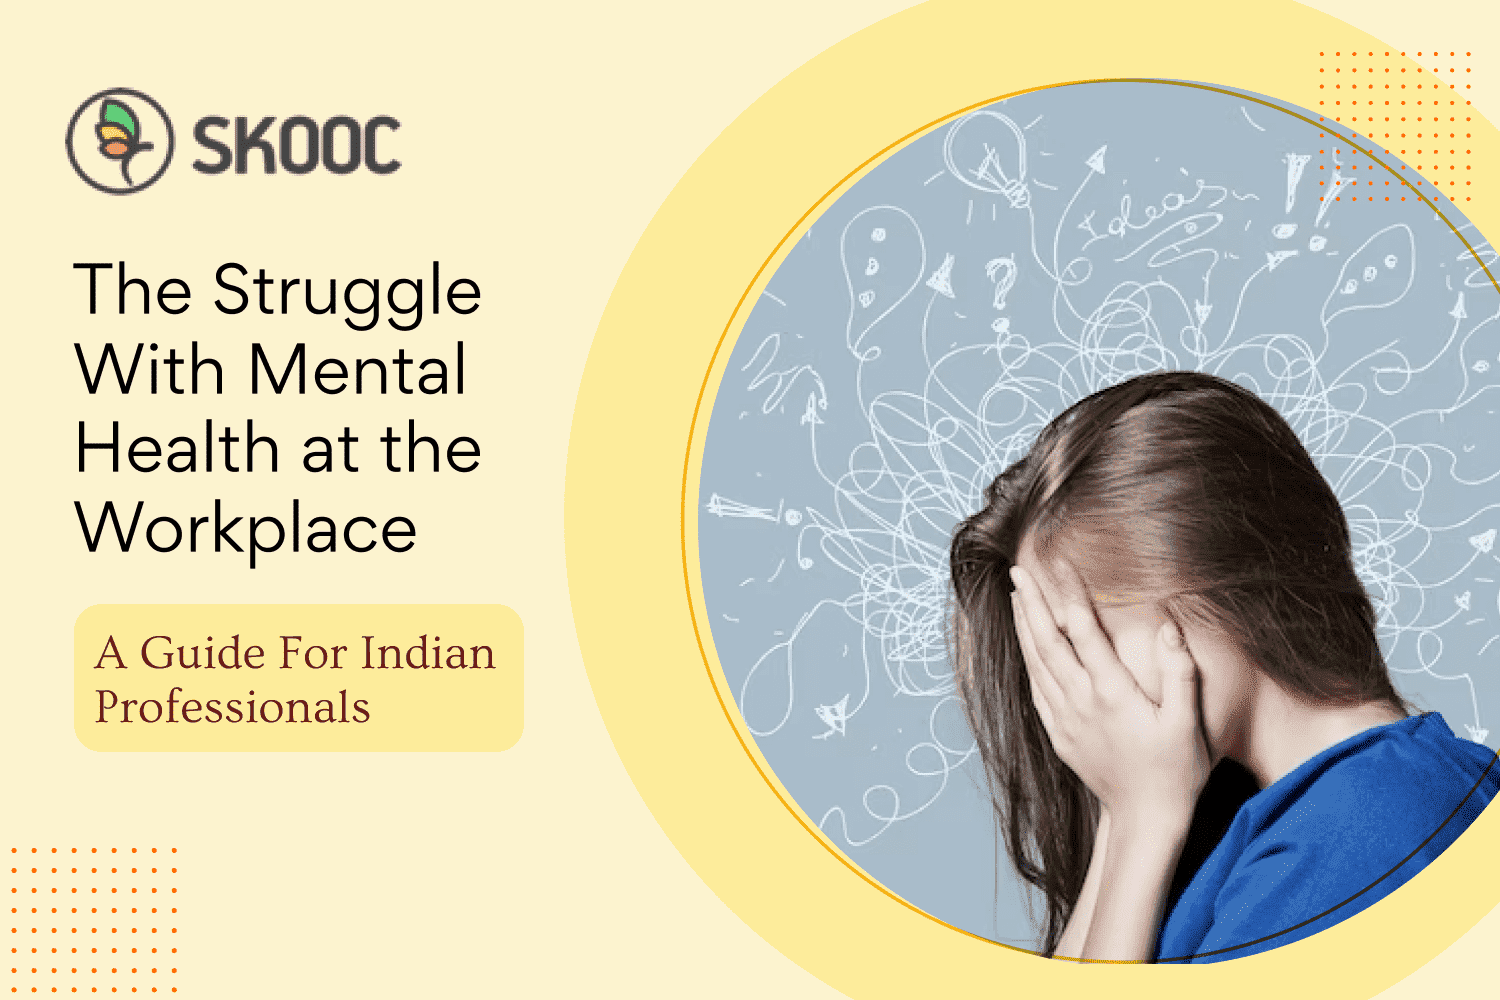 The Struggle With Mental Health at the Workplace: A Guide for Indian Professionals